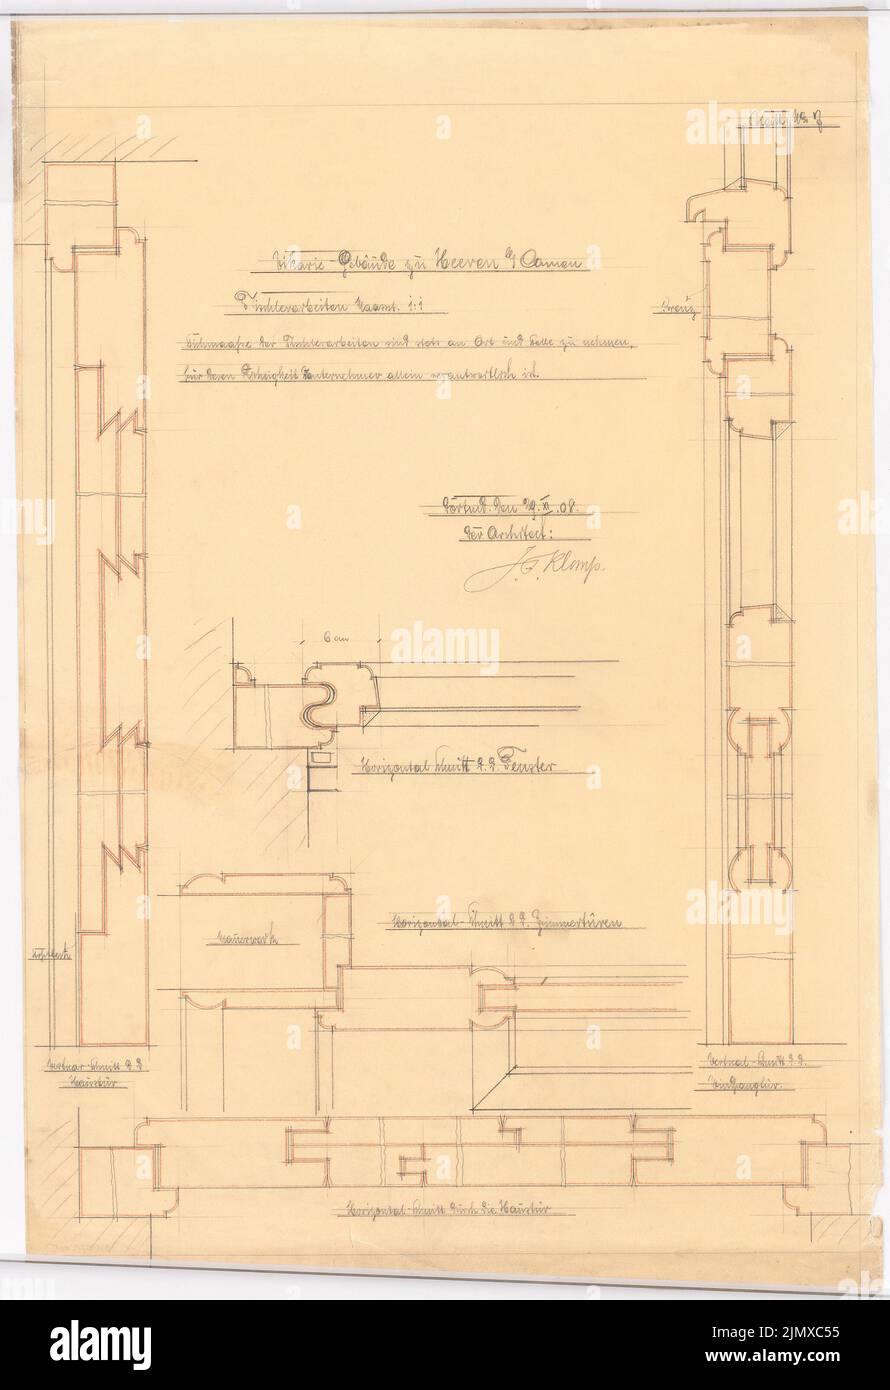 Klomp Johannes Franziskus (1865-1946), Herz Jesus Church (with vicarie), Heeren-Werve (November 29, 1908): Typetric work doors and windows, cuts 1: 1. Pencil, colored pencil on transparent, 90.4 x 62 cm (including scan edges) Klomp Johannes Franziskus  (1865-1946): Herz-Jesu-Kirche (mit Vikarie), Heeren-Werve Stock Photo